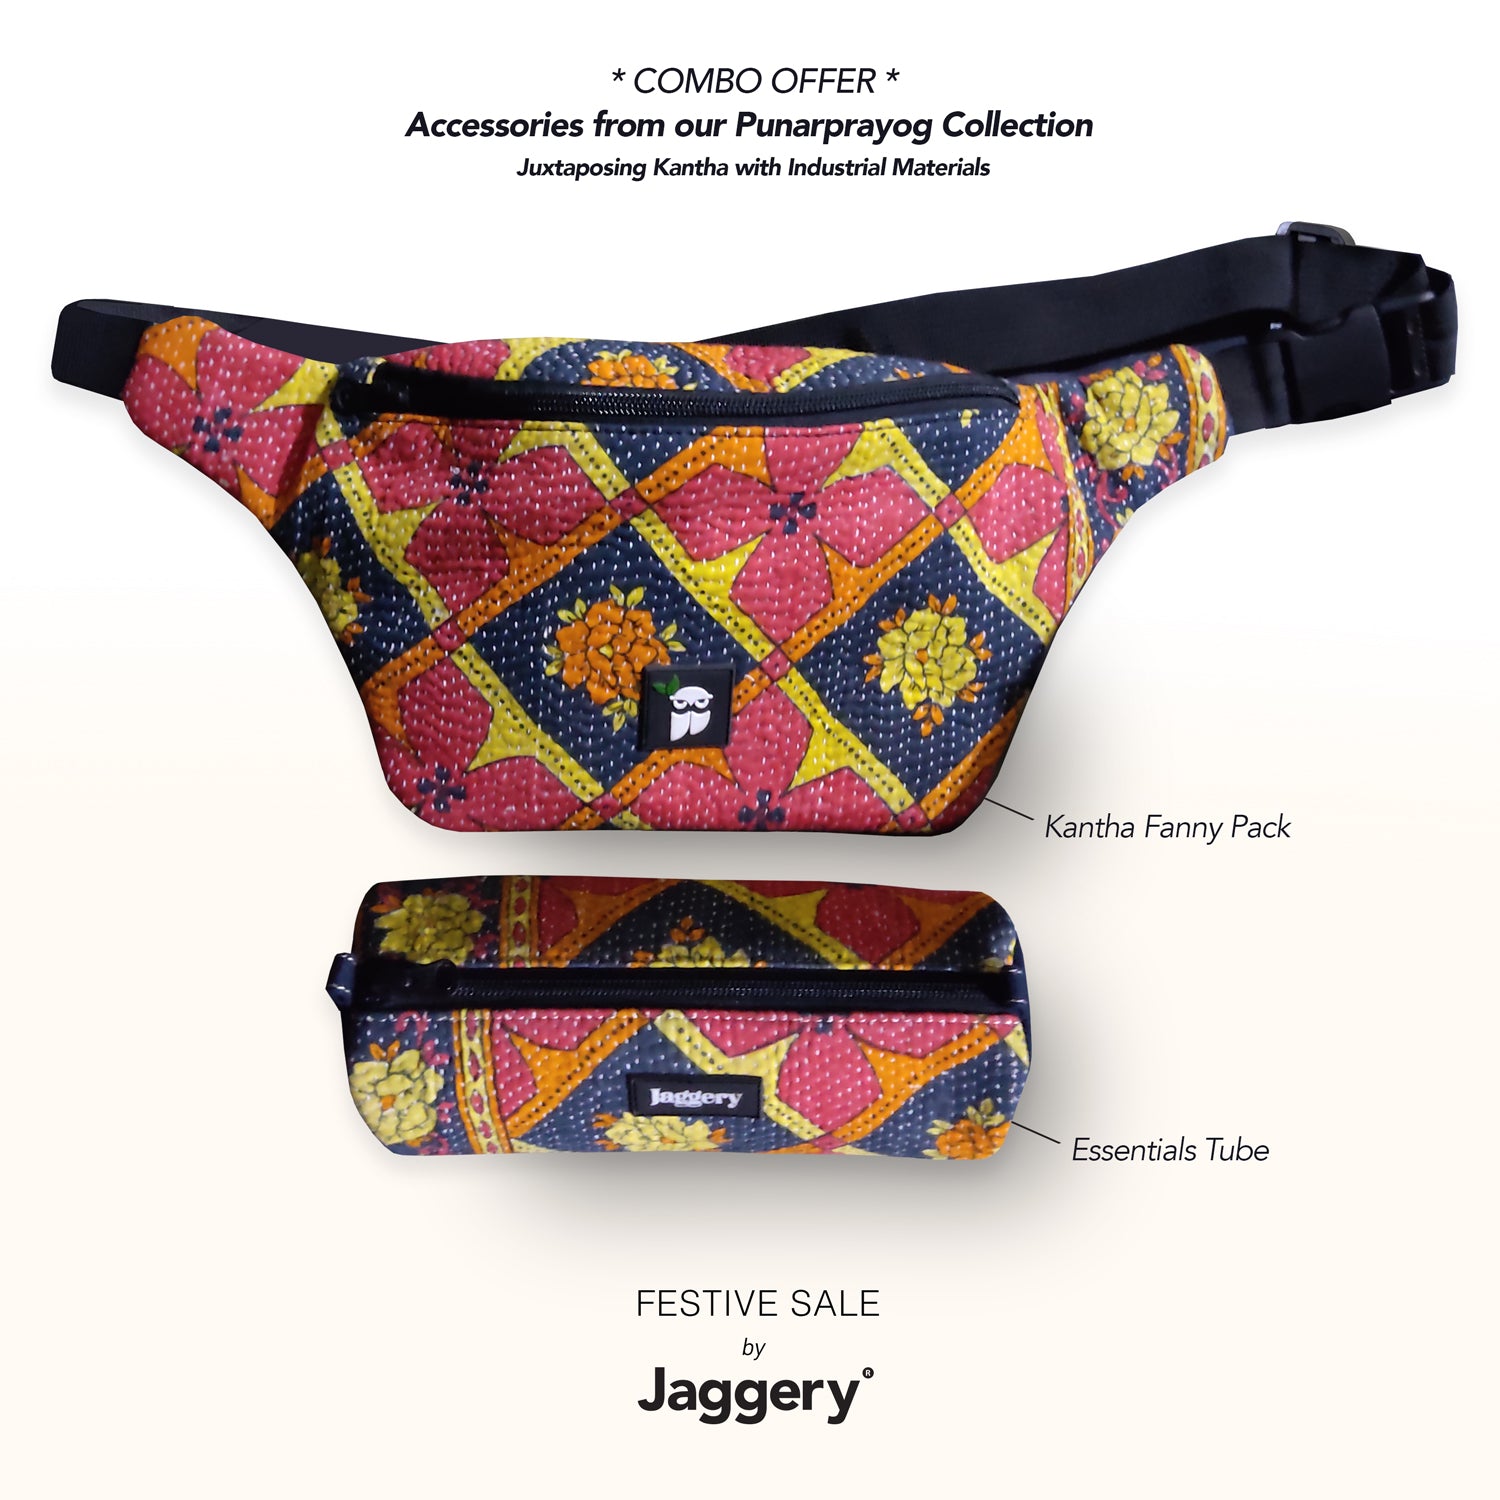 Combo Offer: Fanny Pack and Essentials Tube in Vintage Kantha